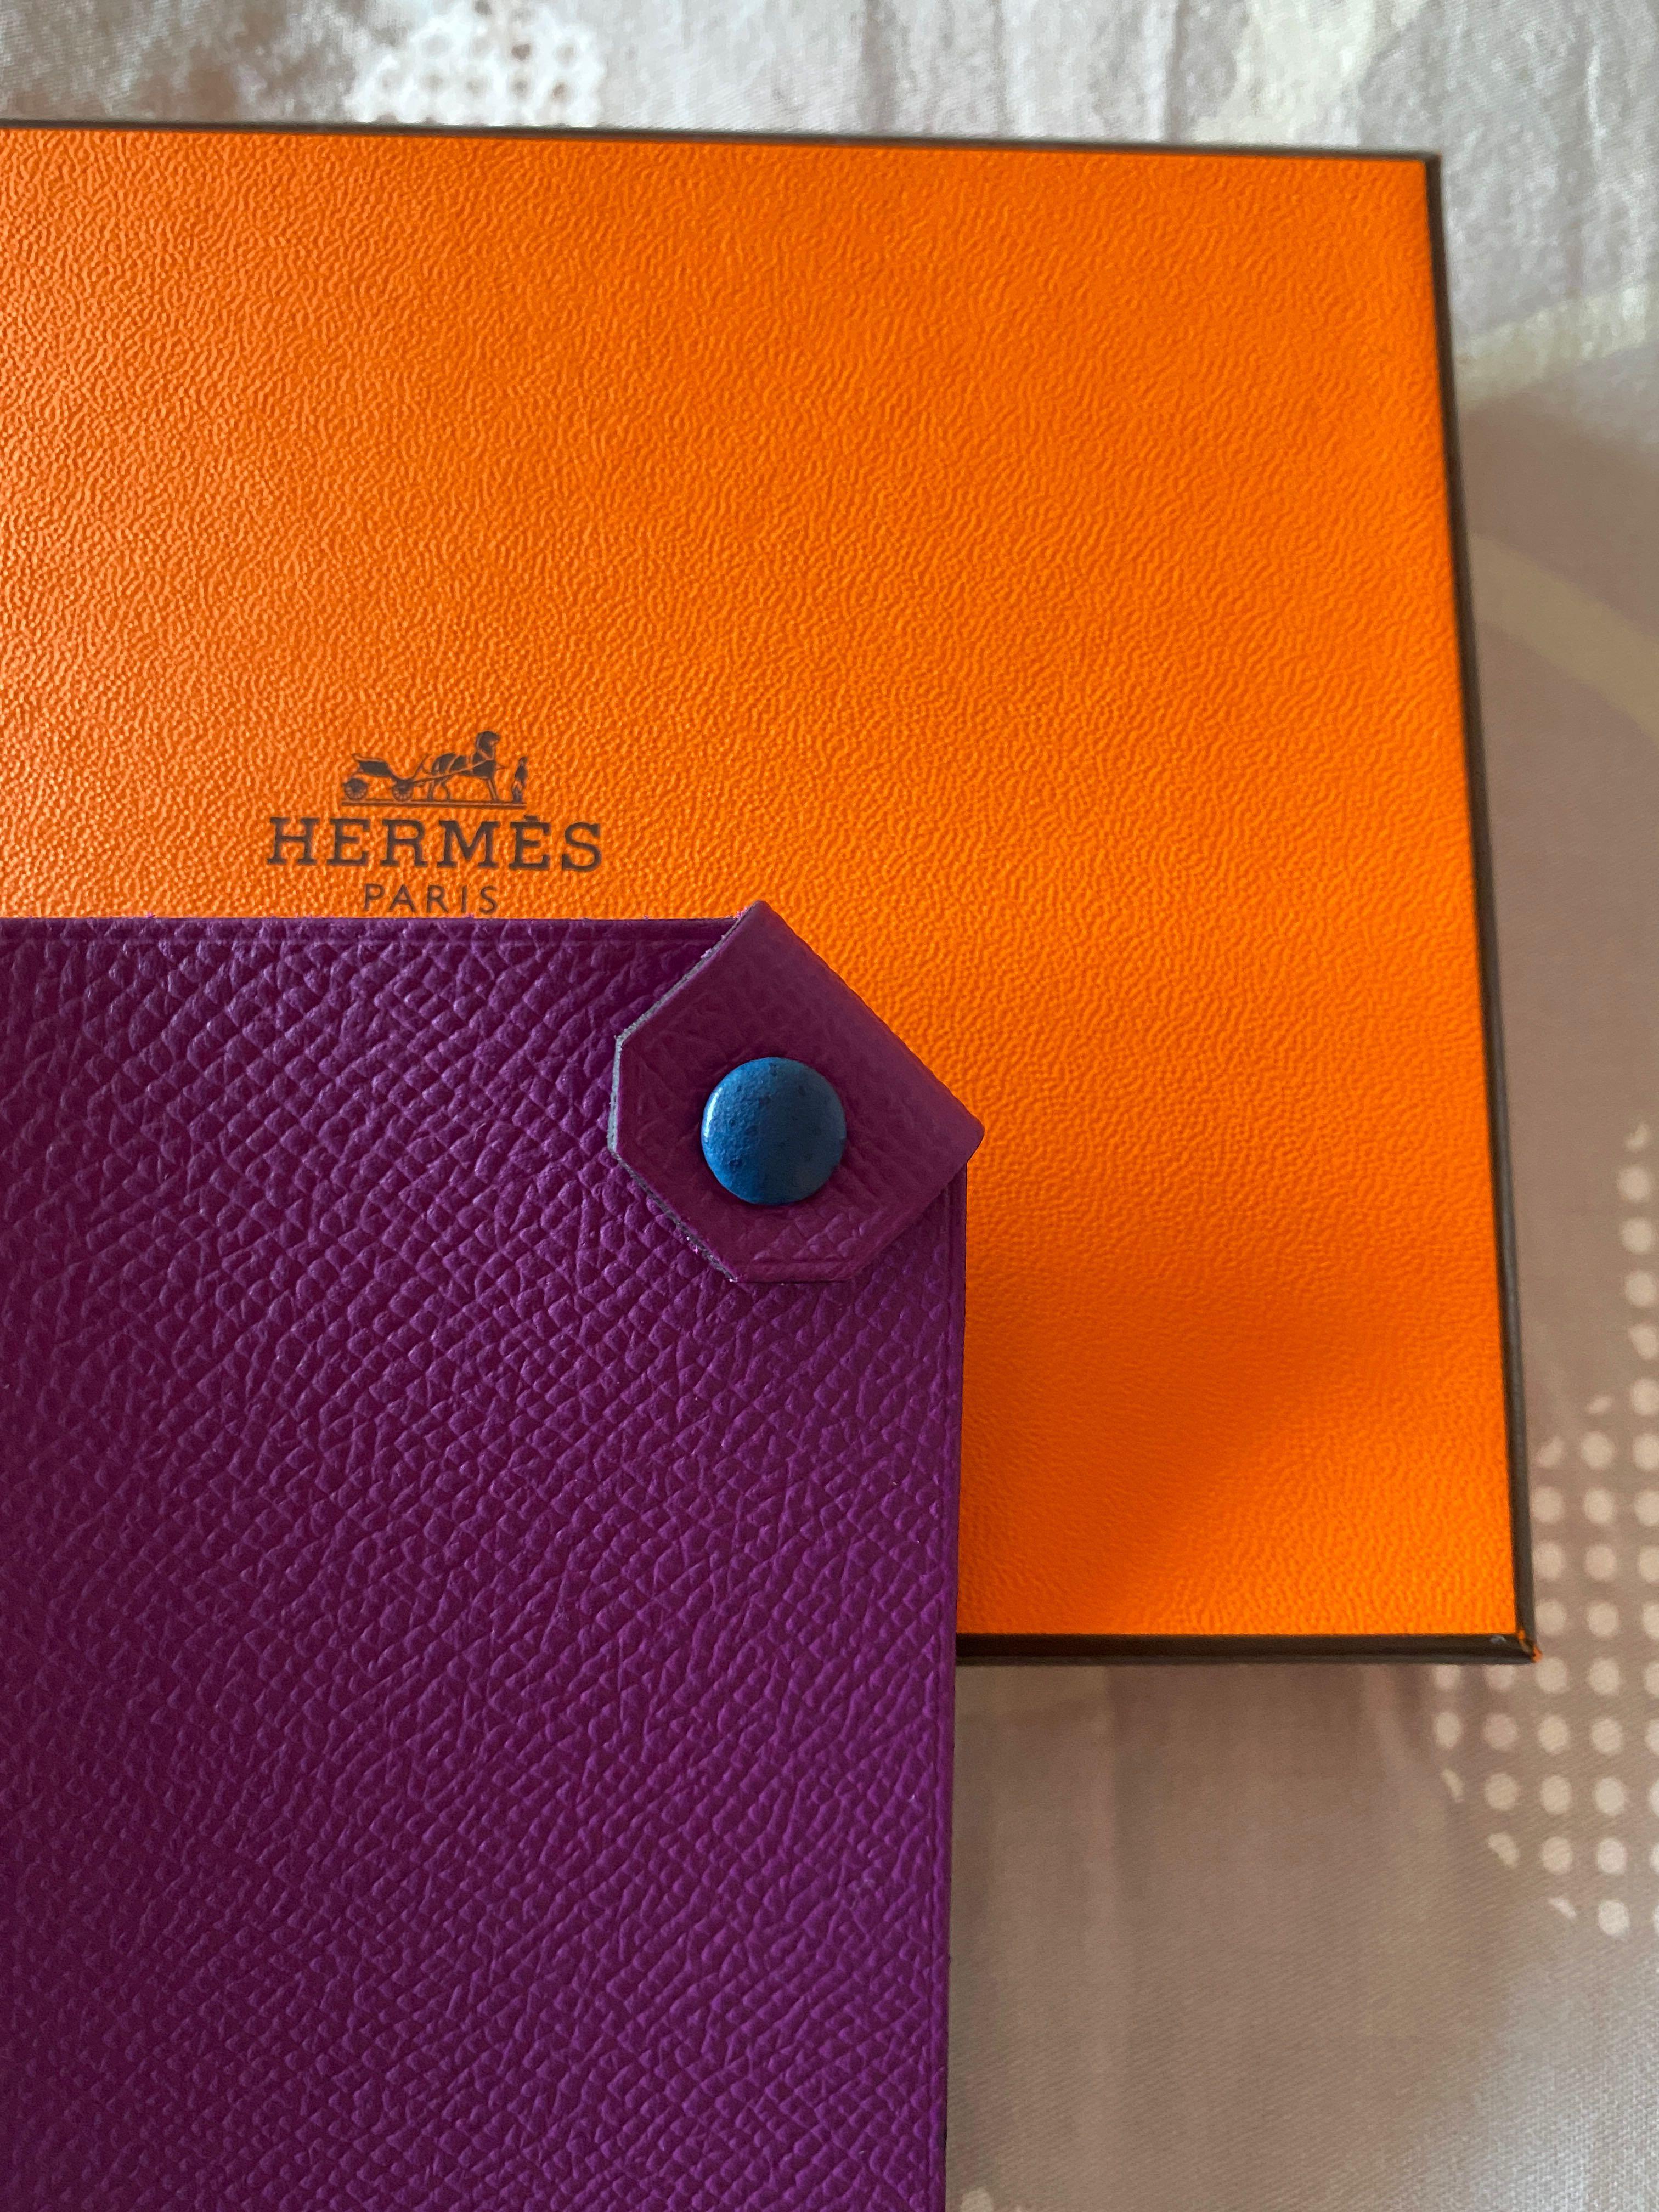 Rare New Hermes Tarmac Passport Holder in Peau Porc Leather Pigskin in 1H  Toffee